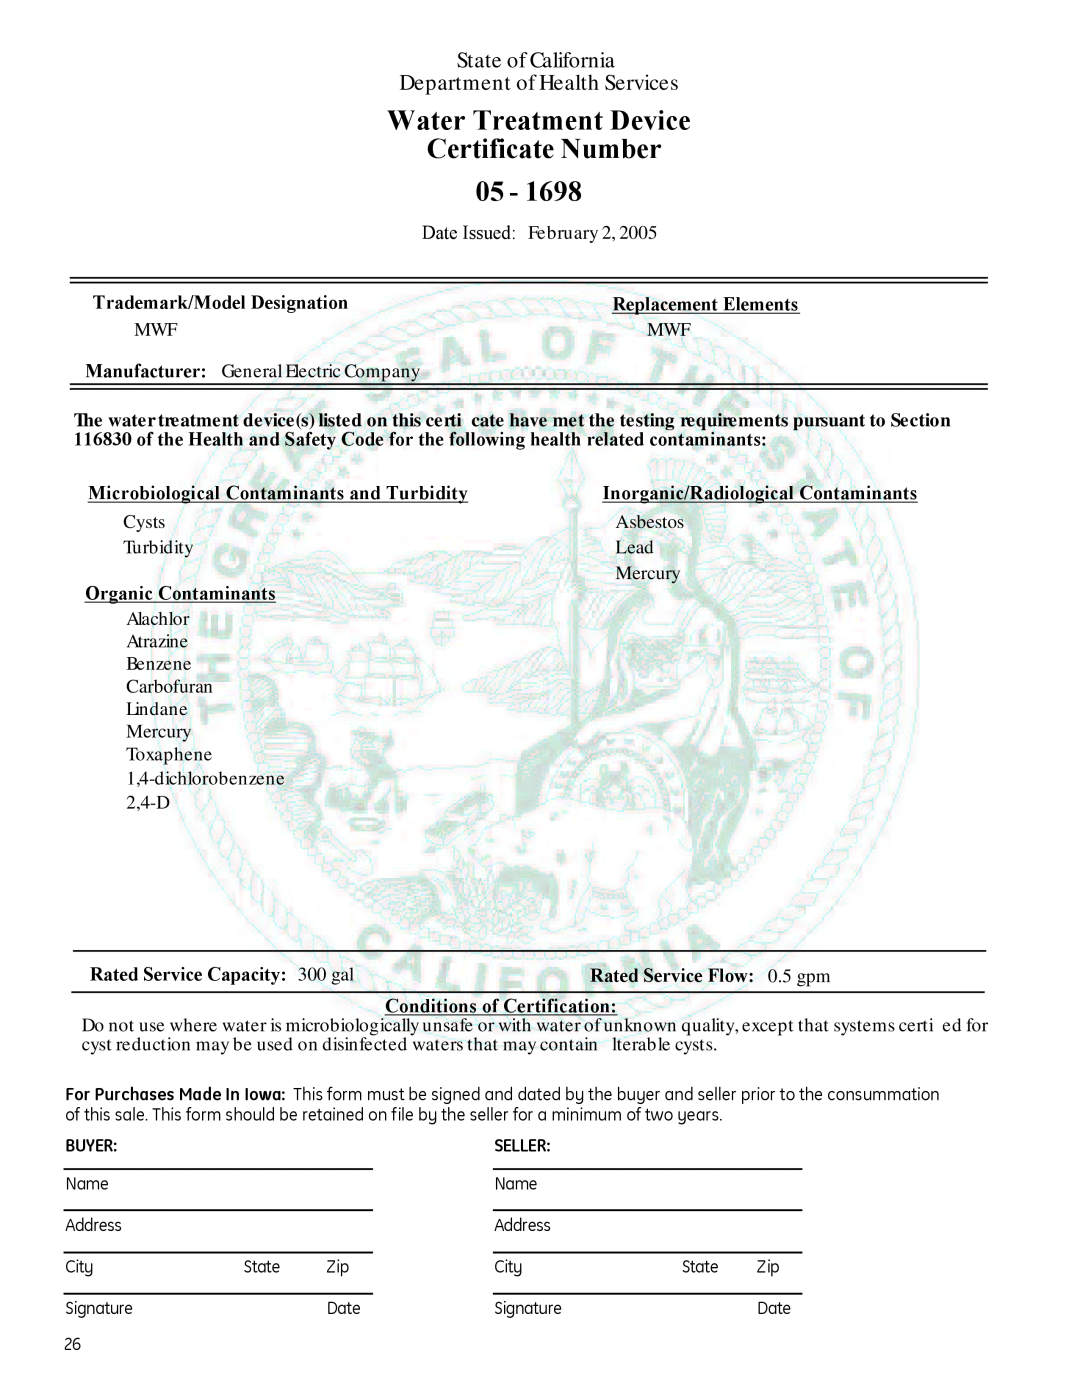 GE Monogram 225D1804P011 Certificate Number, Water Treatment Device, State of California, Department of Health Services 